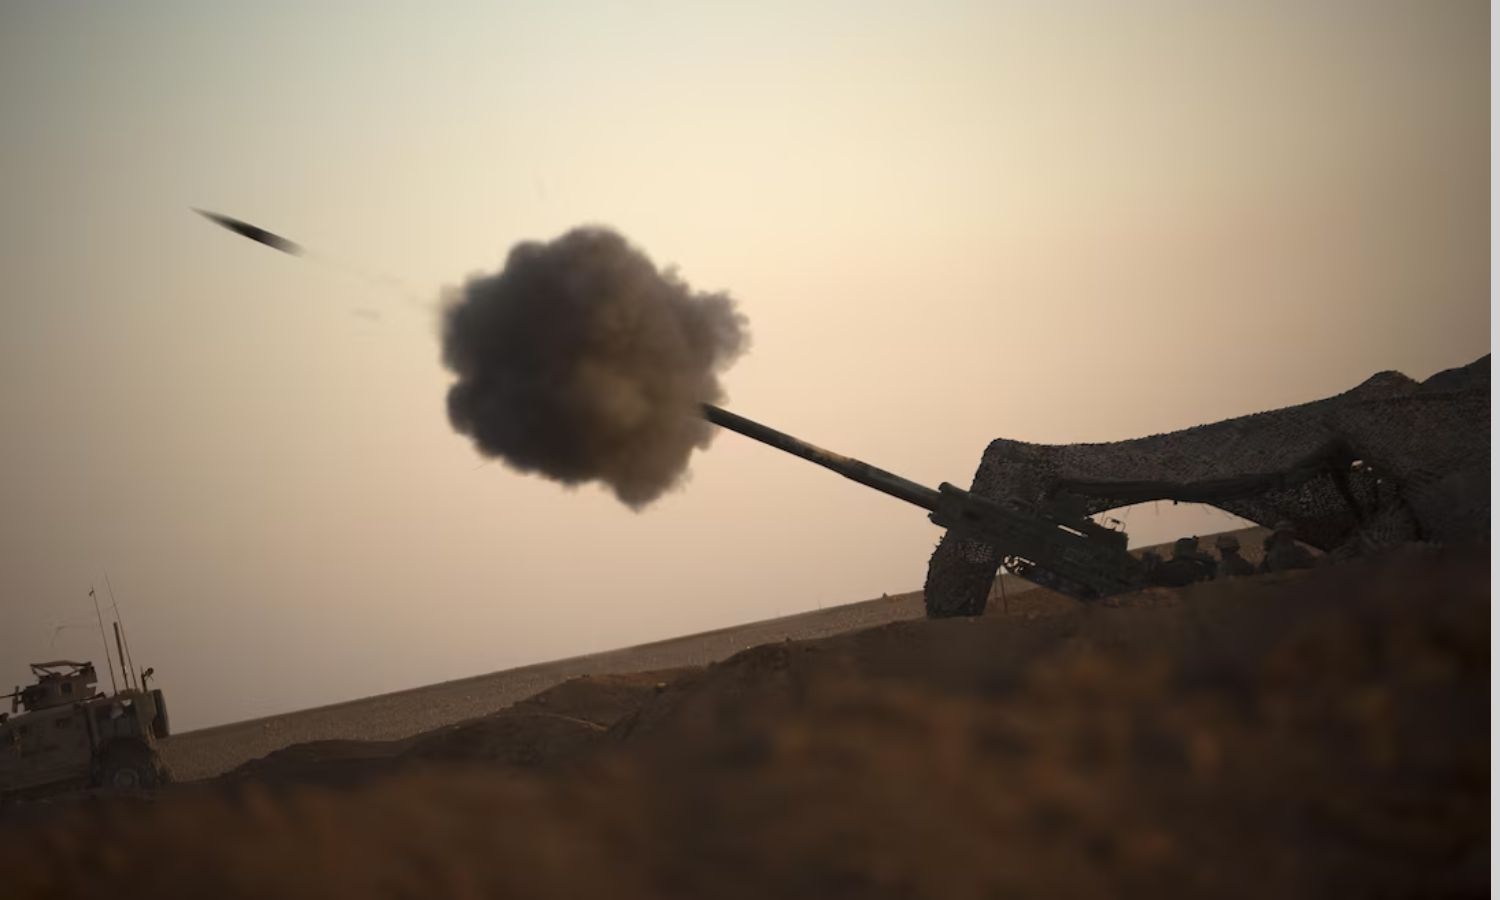 US Marine units carrying out an artillery targeting operation against the Islamic State positions in northeast Syria - May 15, 2017 (CENTCOM)